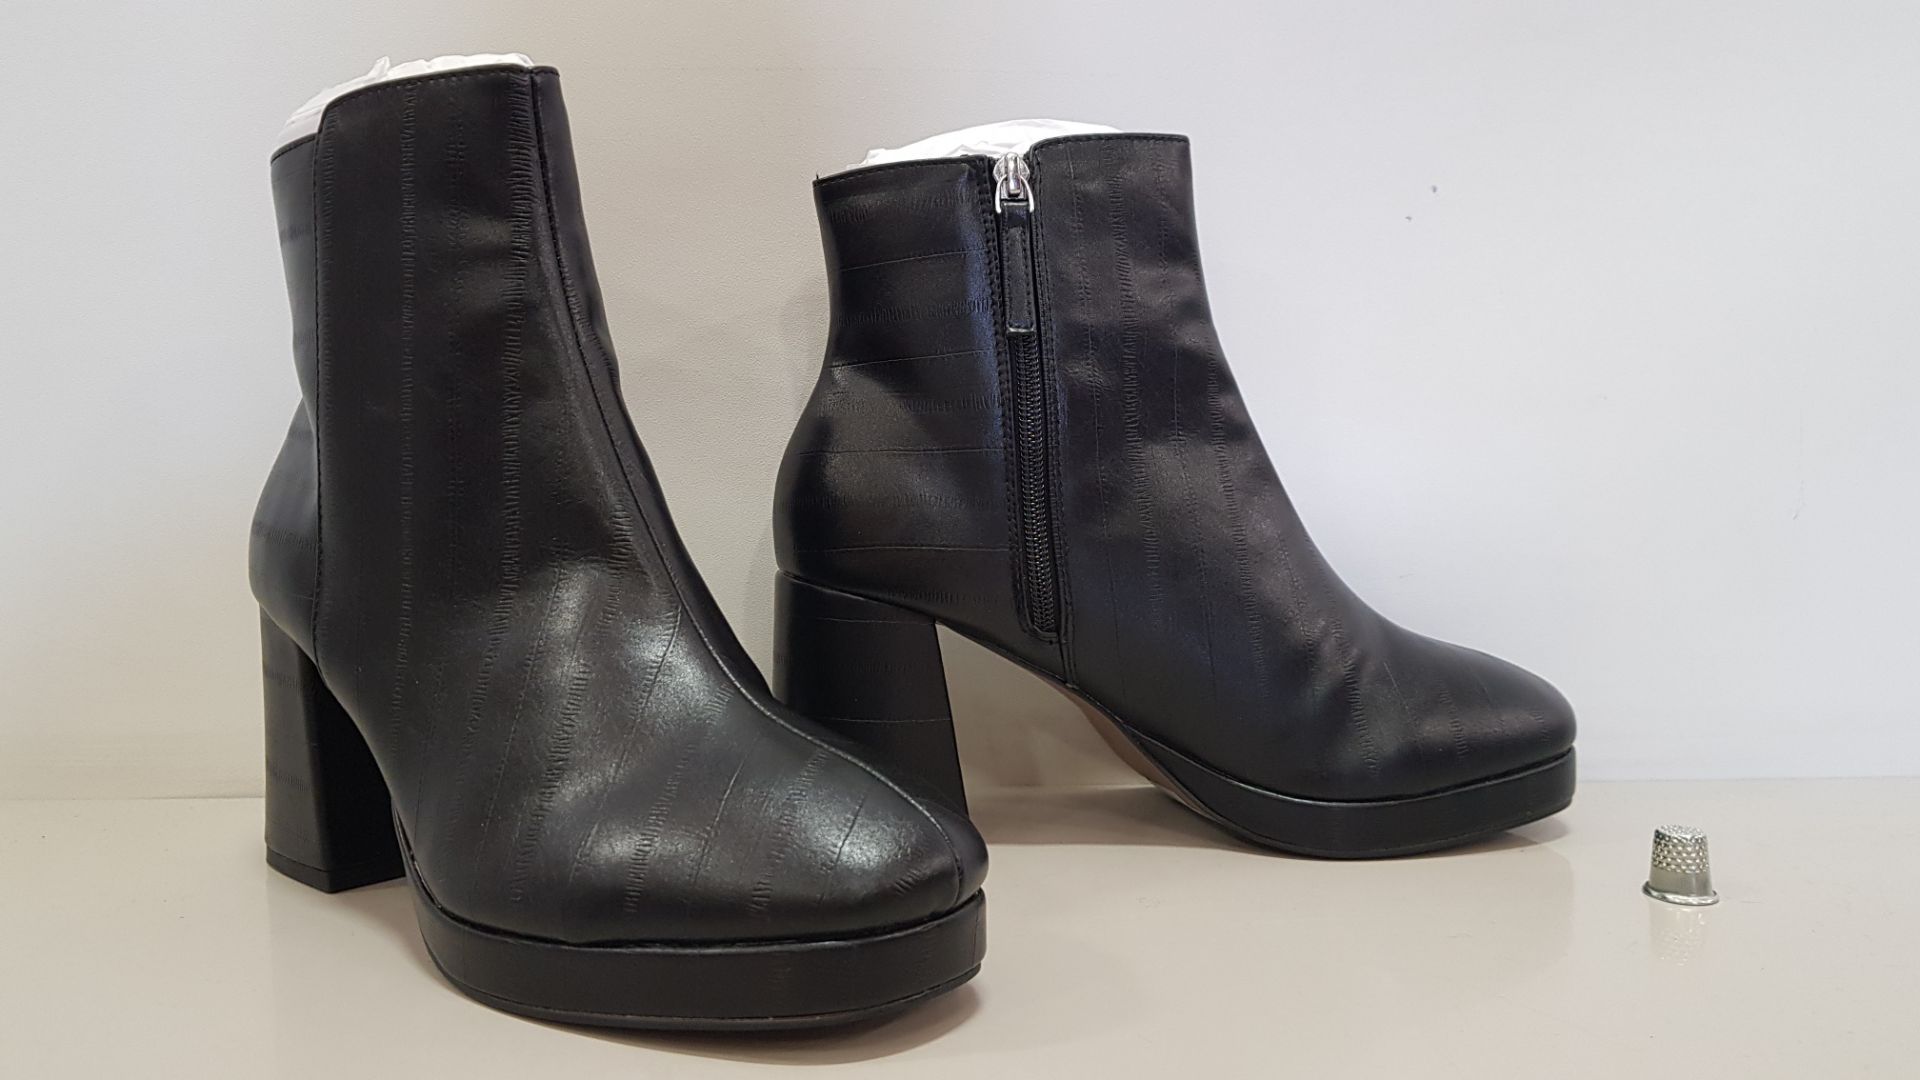 16 X BRAND NEW TOPSHOP BLACK BOOTS UK SIZE 7